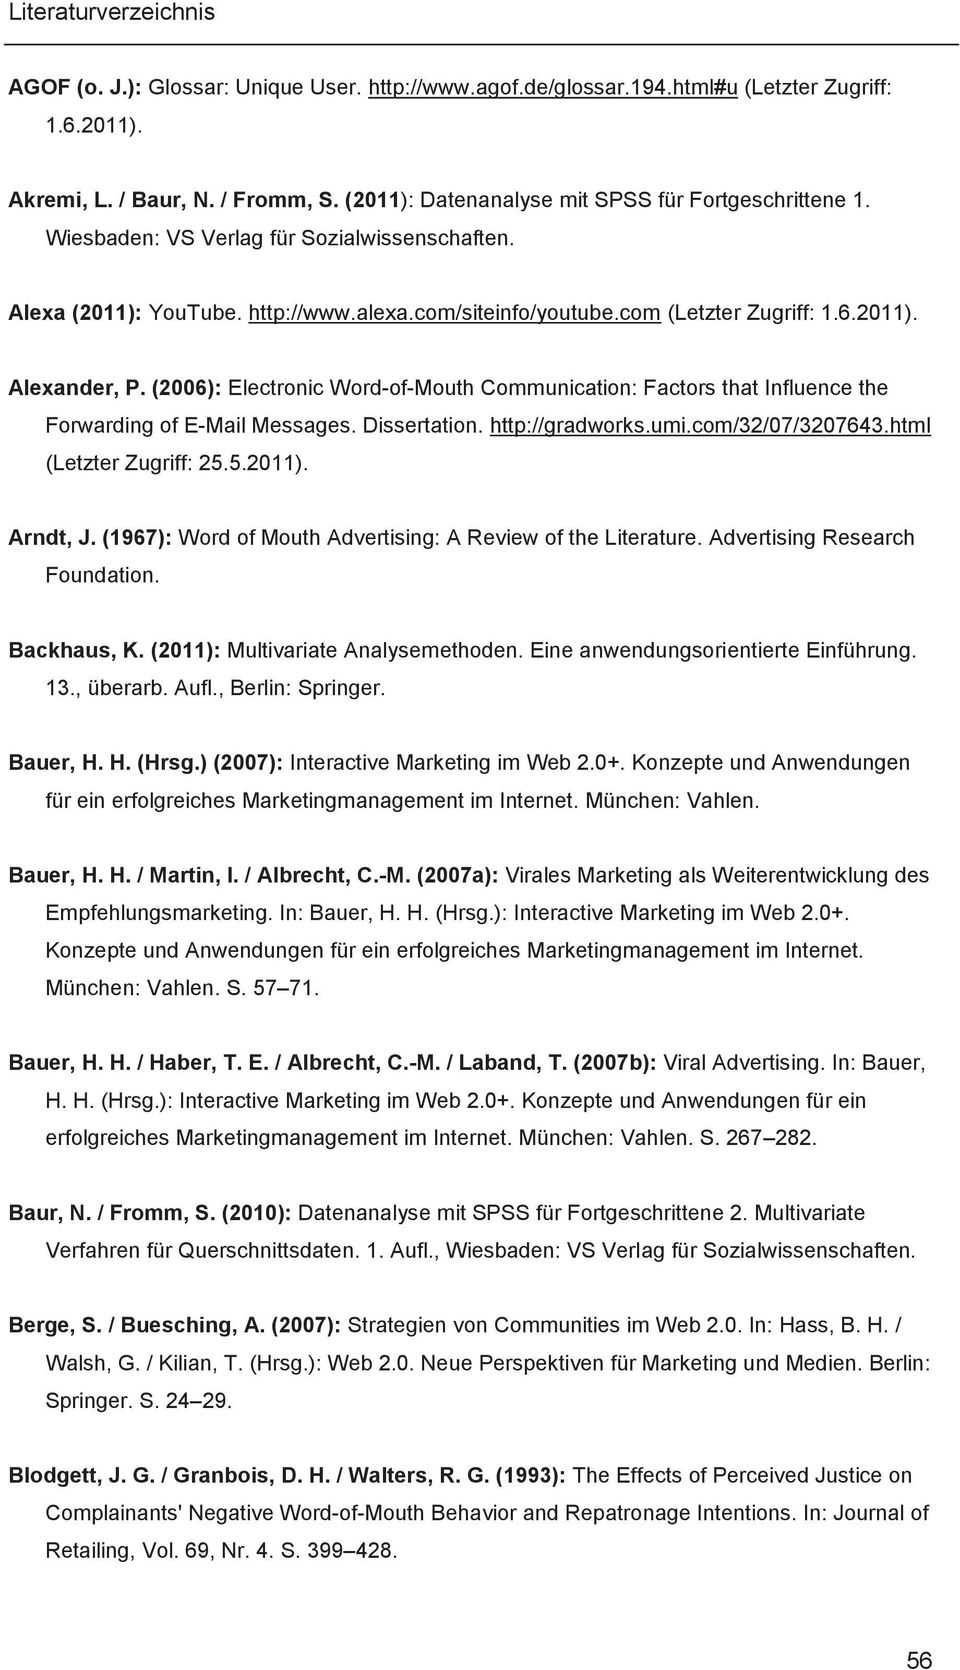 (2006): Electronic Word-of-Mouth Communication: Factors that Influence the Forwarding of E-Mail Messages. Dissertation. http://gradworks.umi.com/32/07/3207643.html (Letzter Zugriff: 25.5.2011).